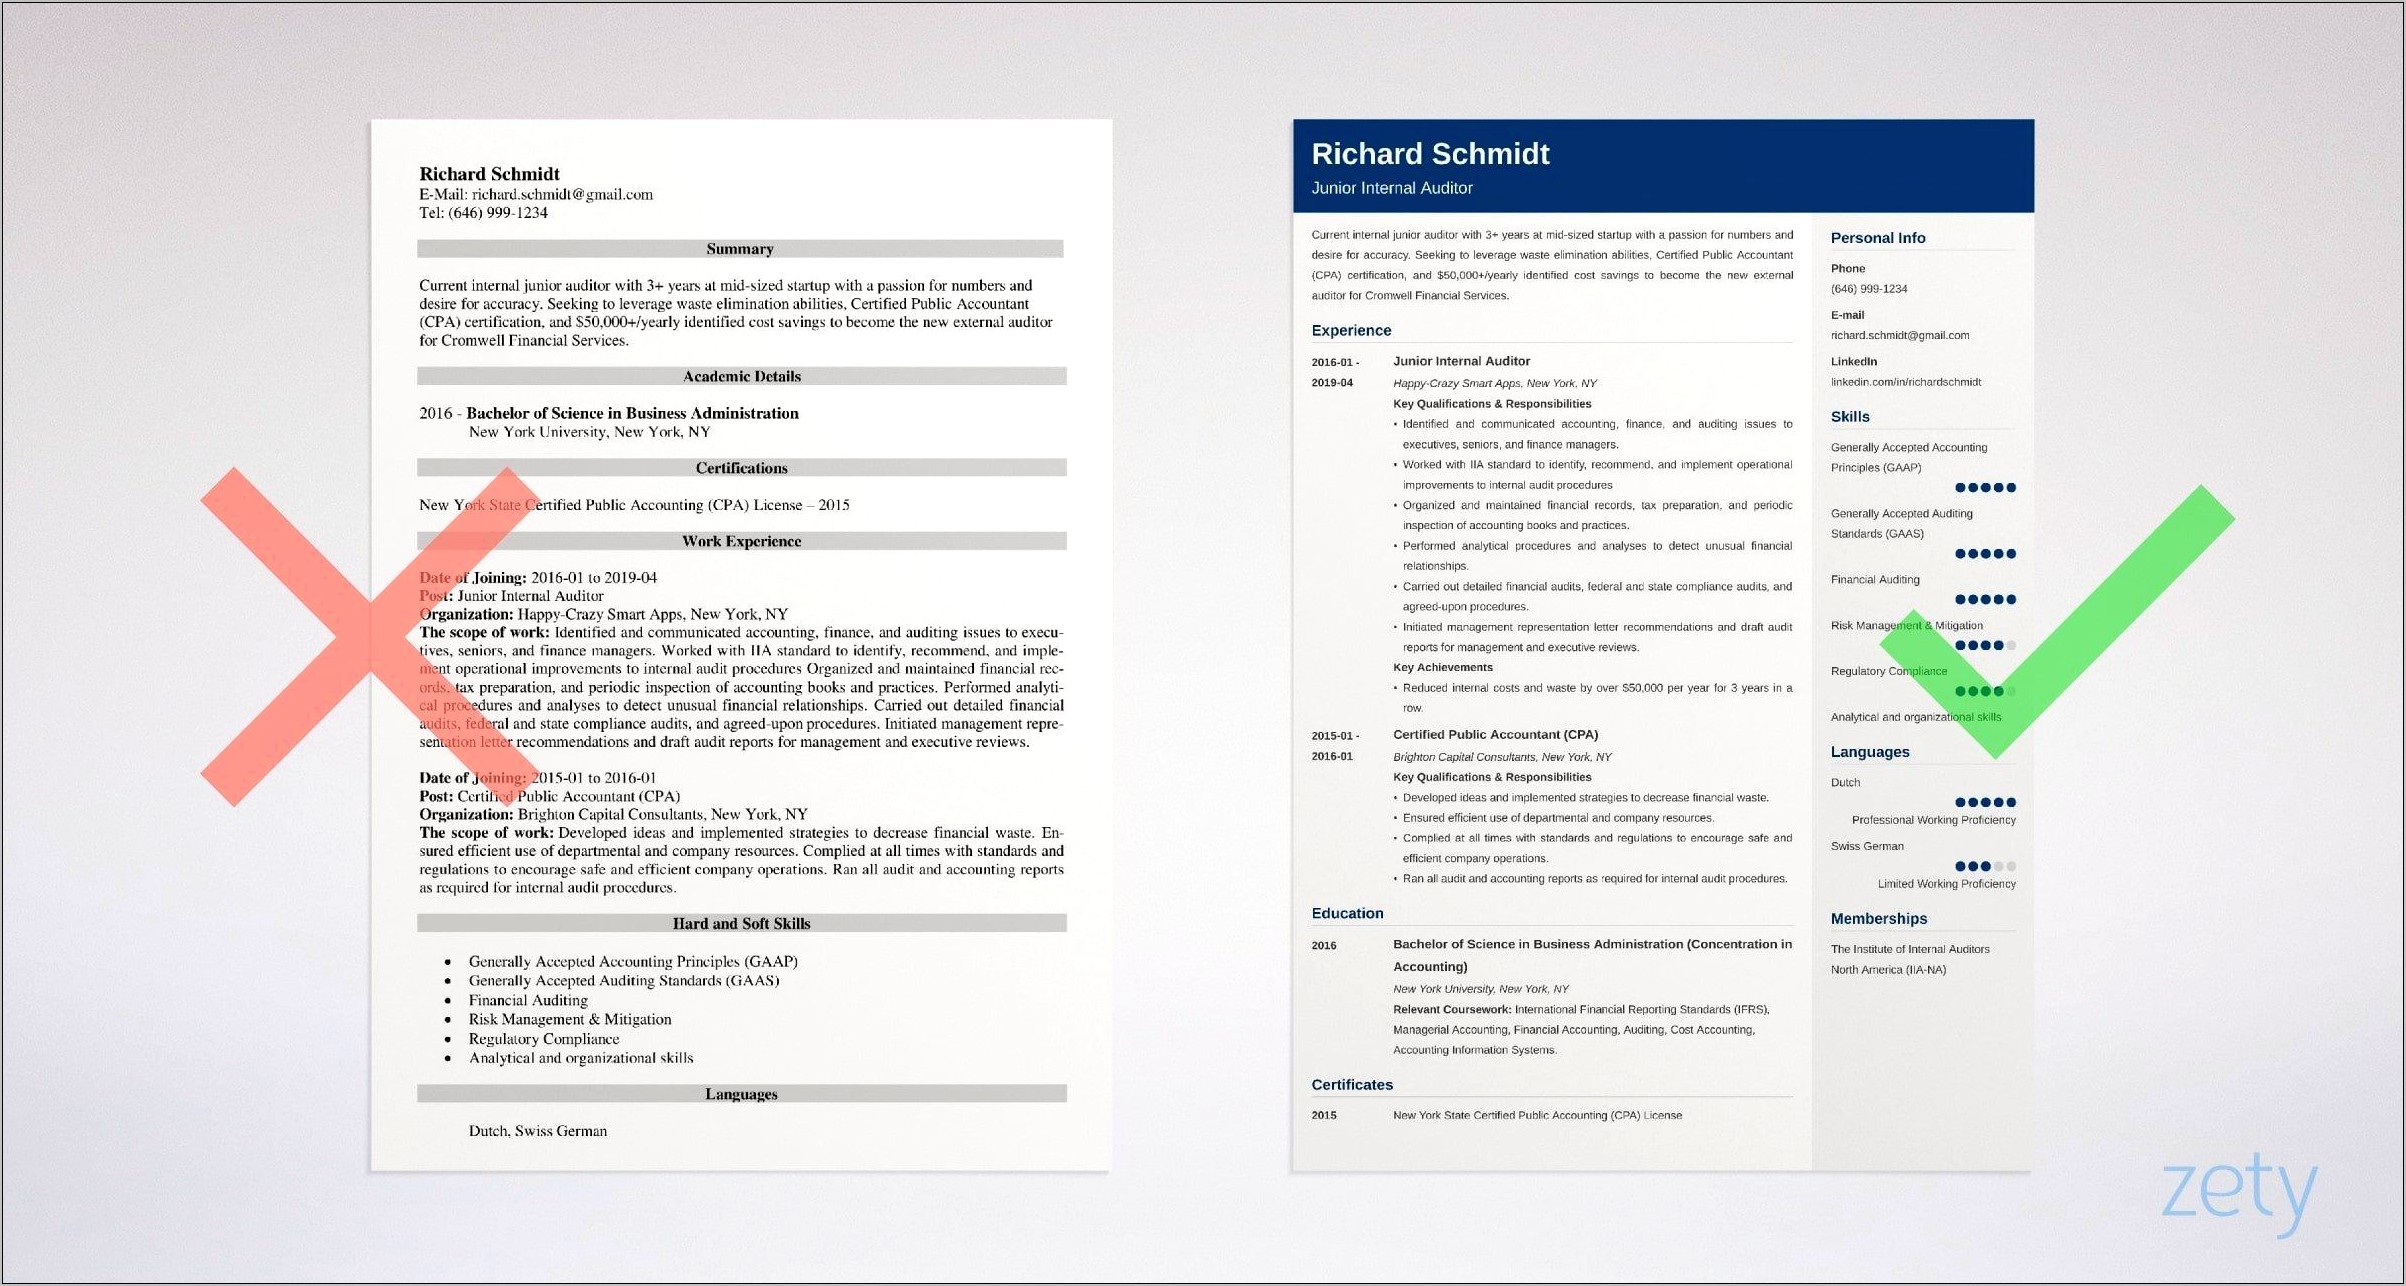 Resume Summary Examples For Internal Auditor Natural Gas